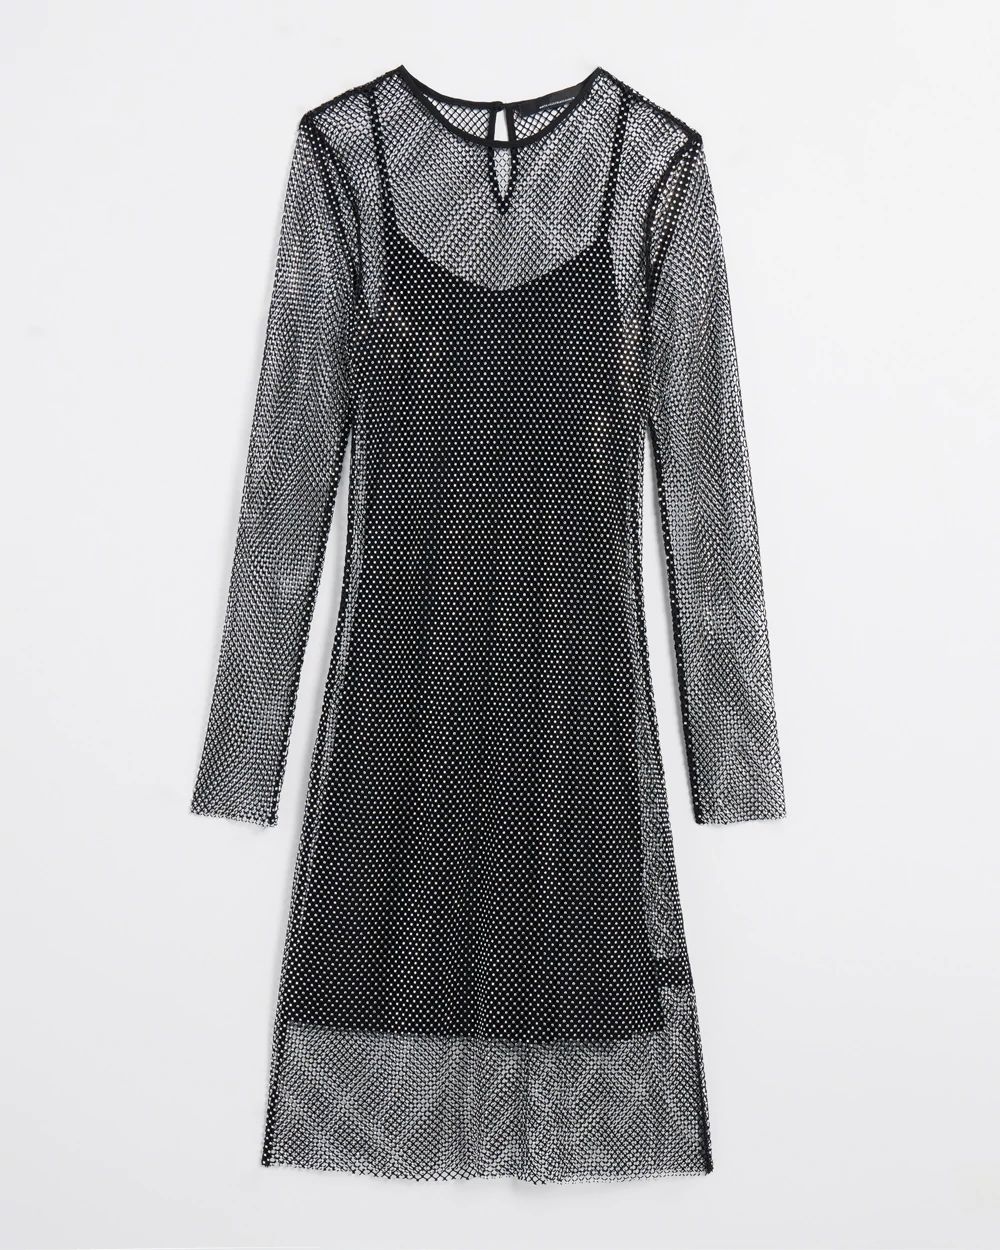 Long Sleeve Crystal Mesh Mini Dress click to view larger image.